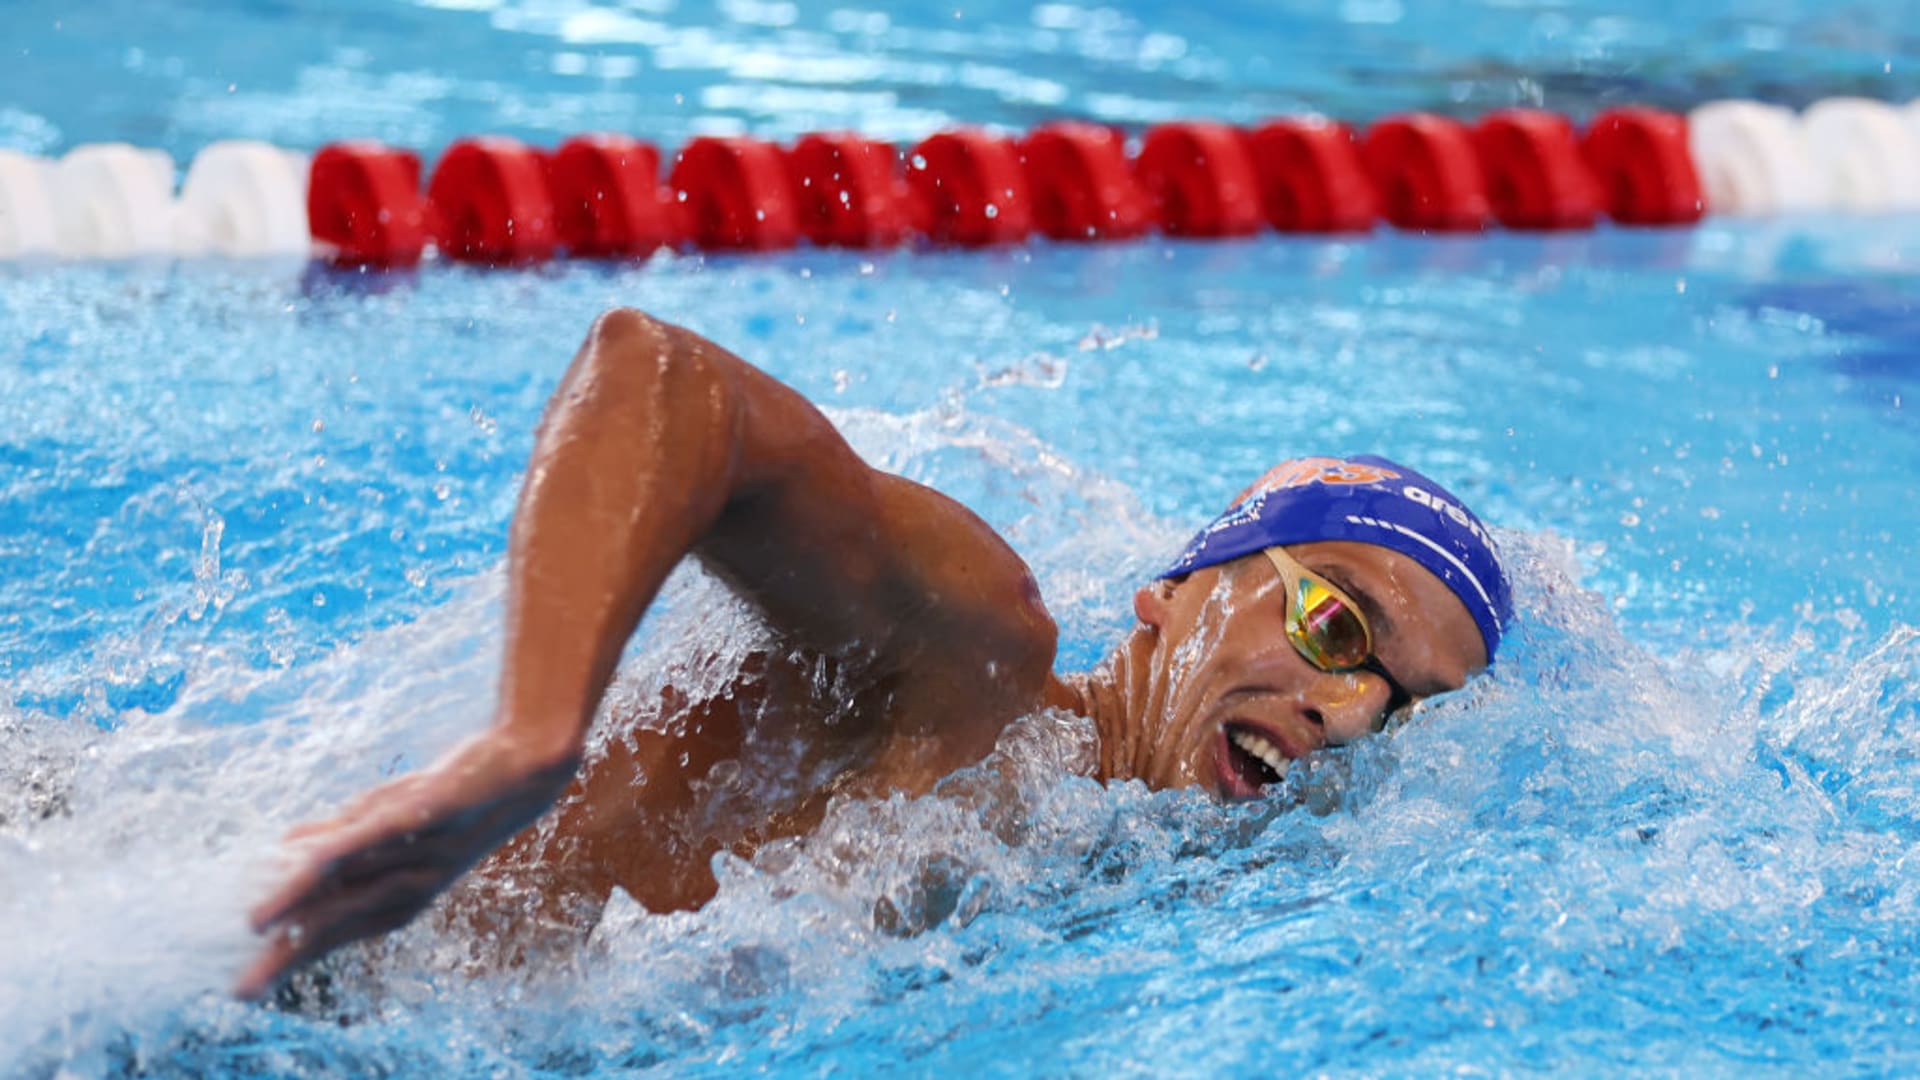 Swimmer Kalyani wins her 50th medal at national level